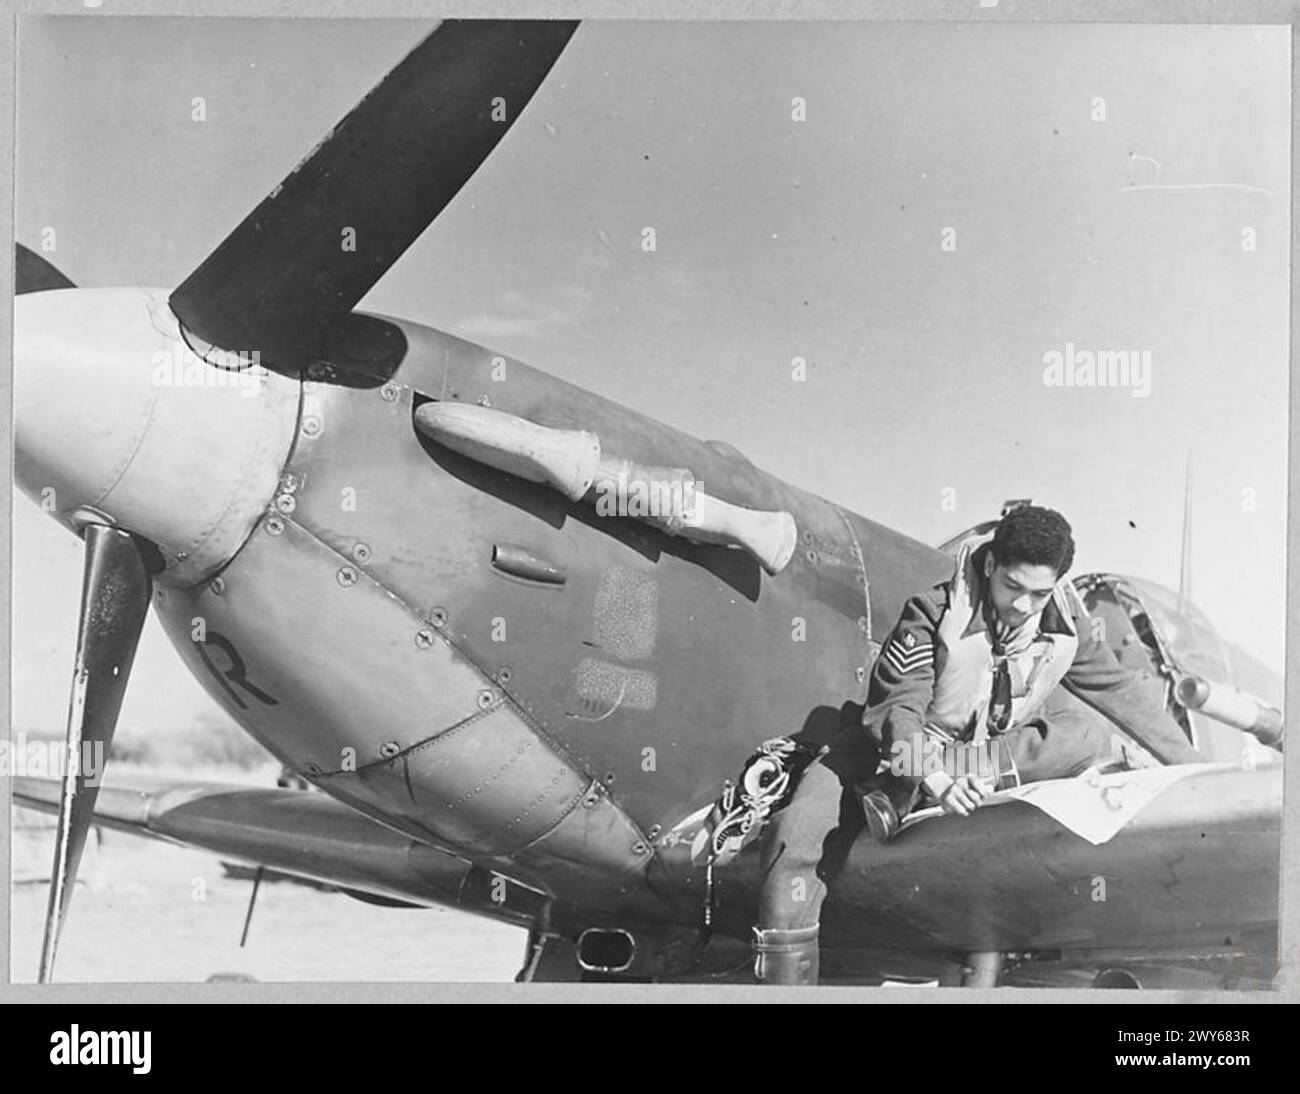 MEN AND 'PLANES OF THE BOMBAY SQUADRON 'STRAFE'ENEMY-OCCUPIED TERRITORY. - Spitfires and men of the Bombay Squadron - they have taken part in Fighter Command sorties over enemy-occupied territory. Picture (issued 1943) shows - Flight Sergeant C.A. Joseph of San Fernando, Trinidad, studying the map before taking off. , Royal Air Force Stock Photo